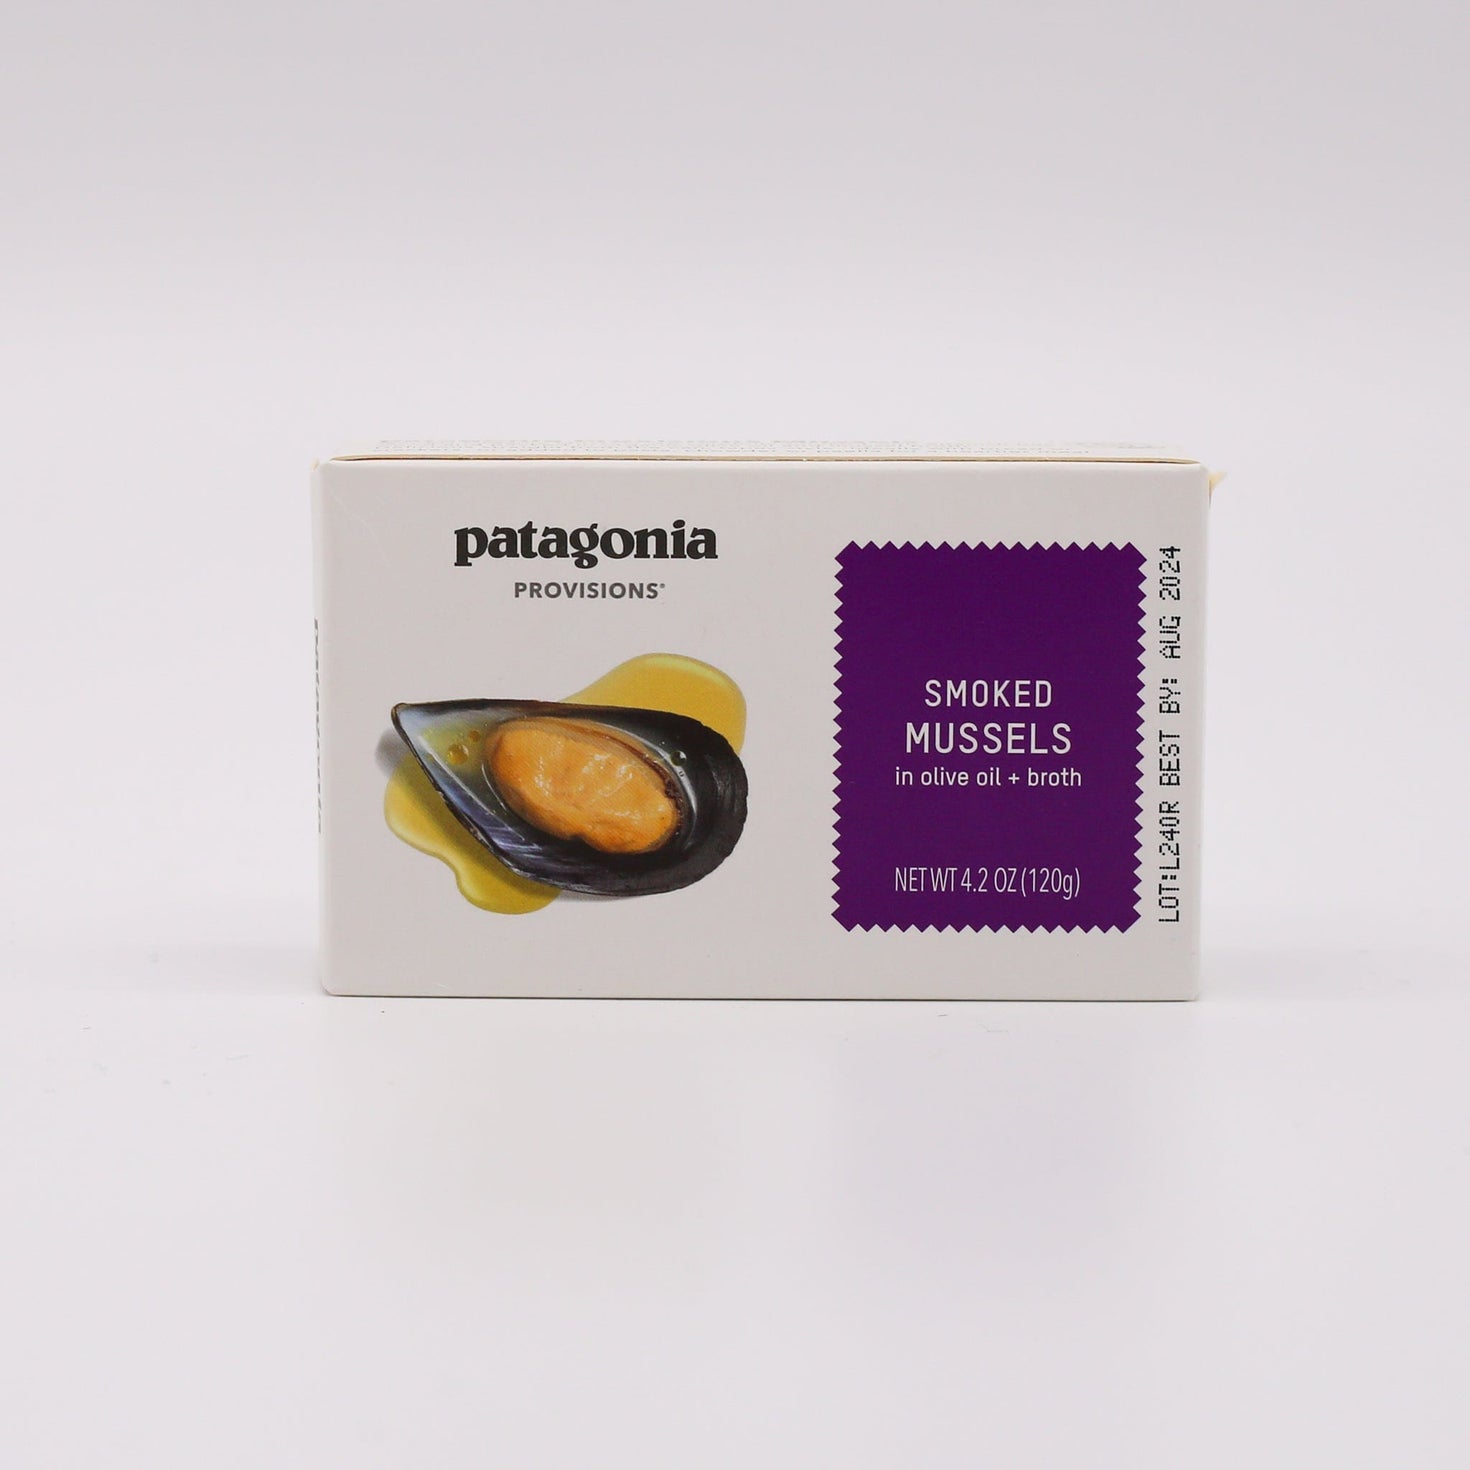 Patagonia Provisions Smoked Mussels 4.2oz